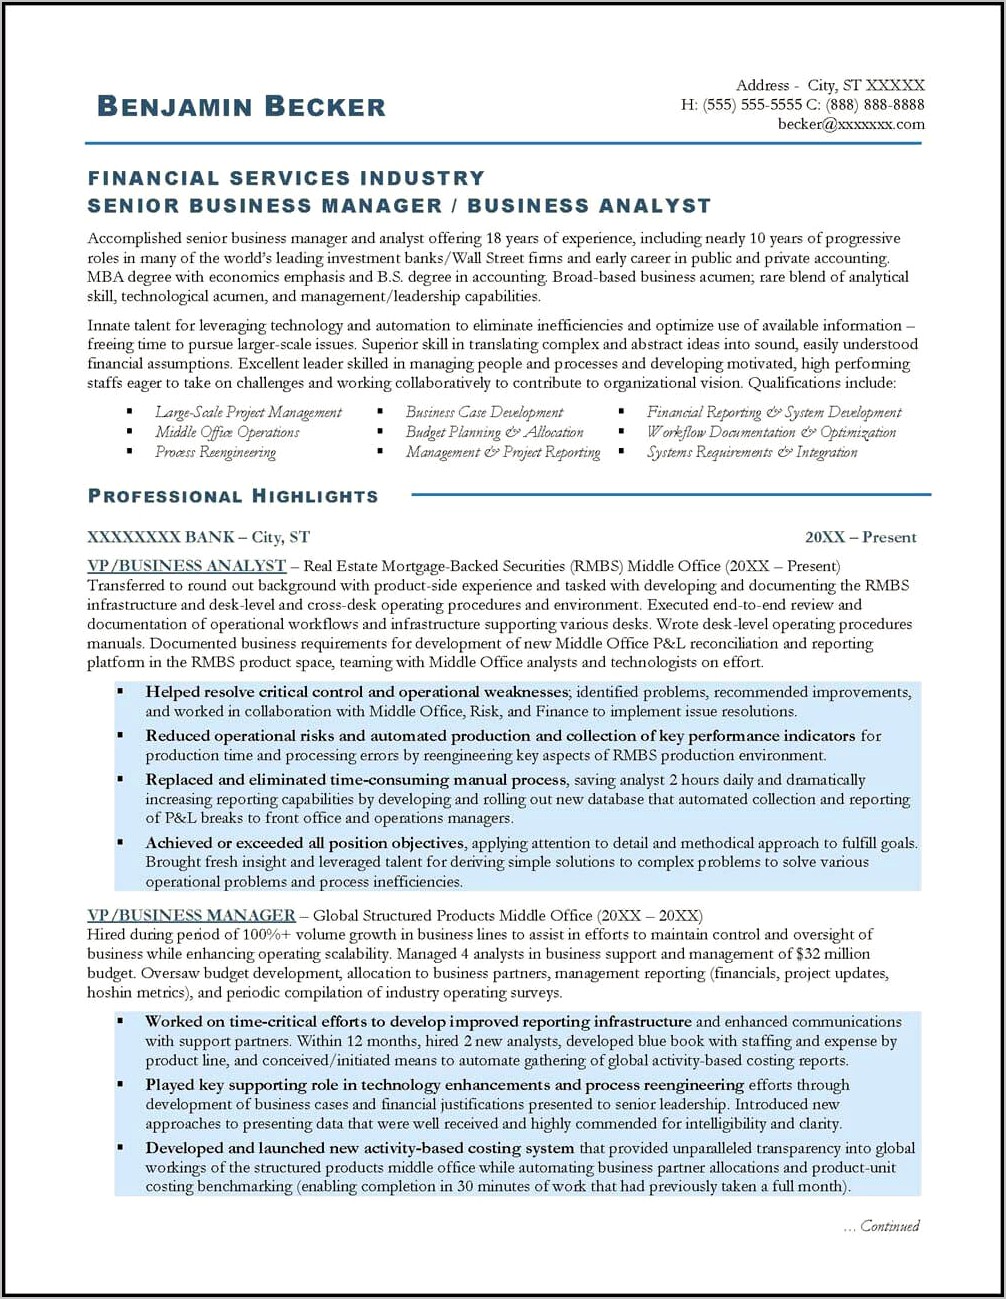 Business Analyst Objective And Goals For Resume